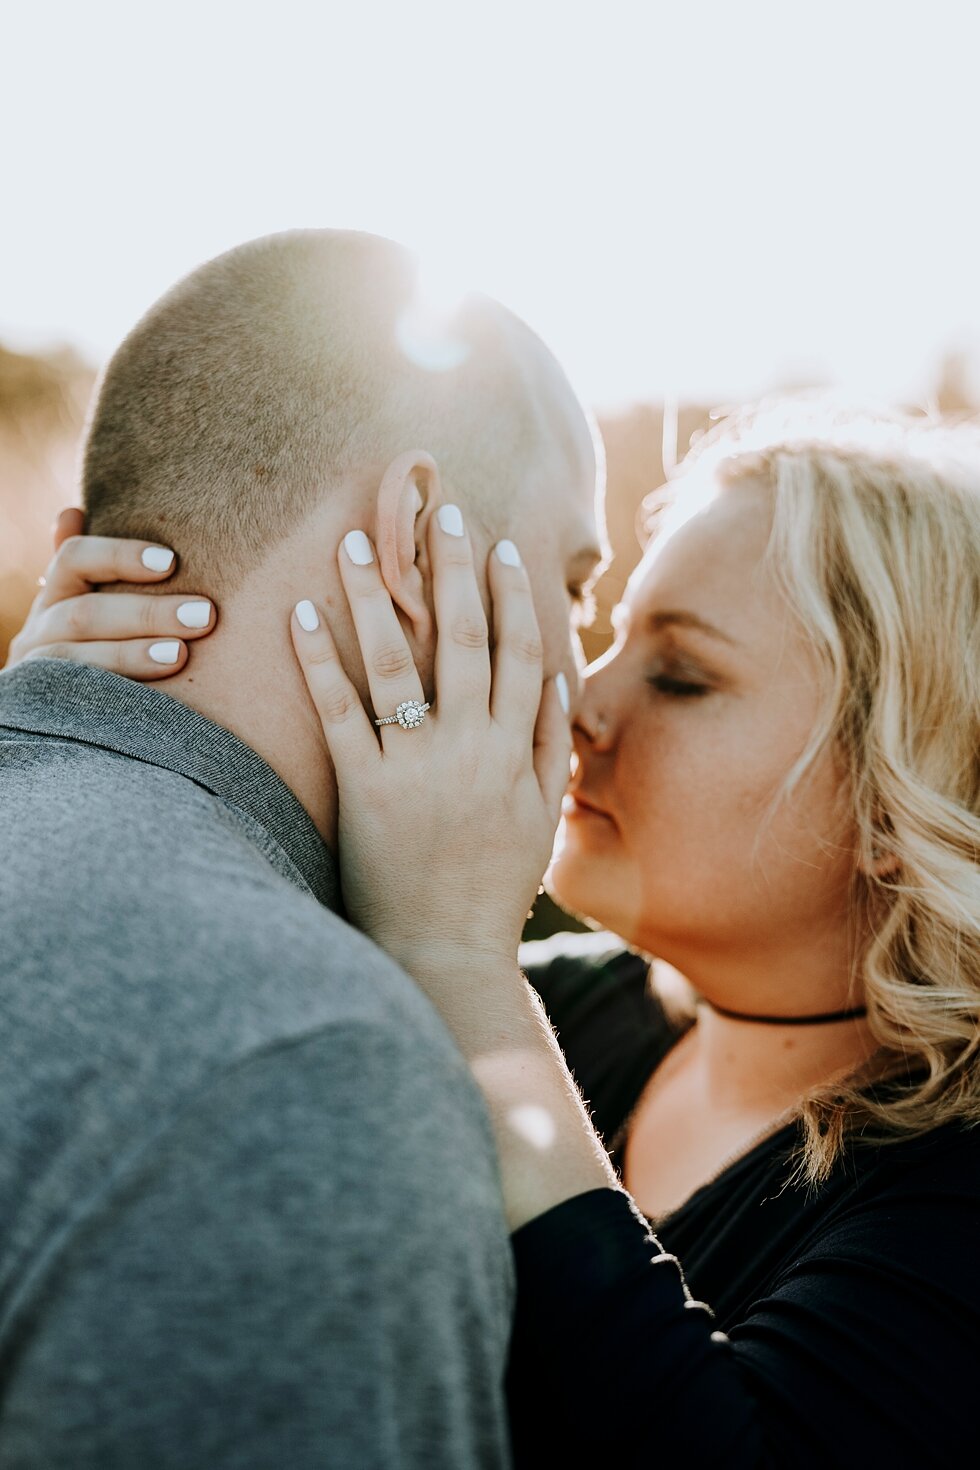  Sharing an engaged kiss as the sun sets behind this engaged couple #engagementgoals #engagementphotographer #engaged #outdoorengagement #kentuckyphotographer #indianaphotographer #louisvillephotographer #engagementphotos #savethedatephotos #savethed